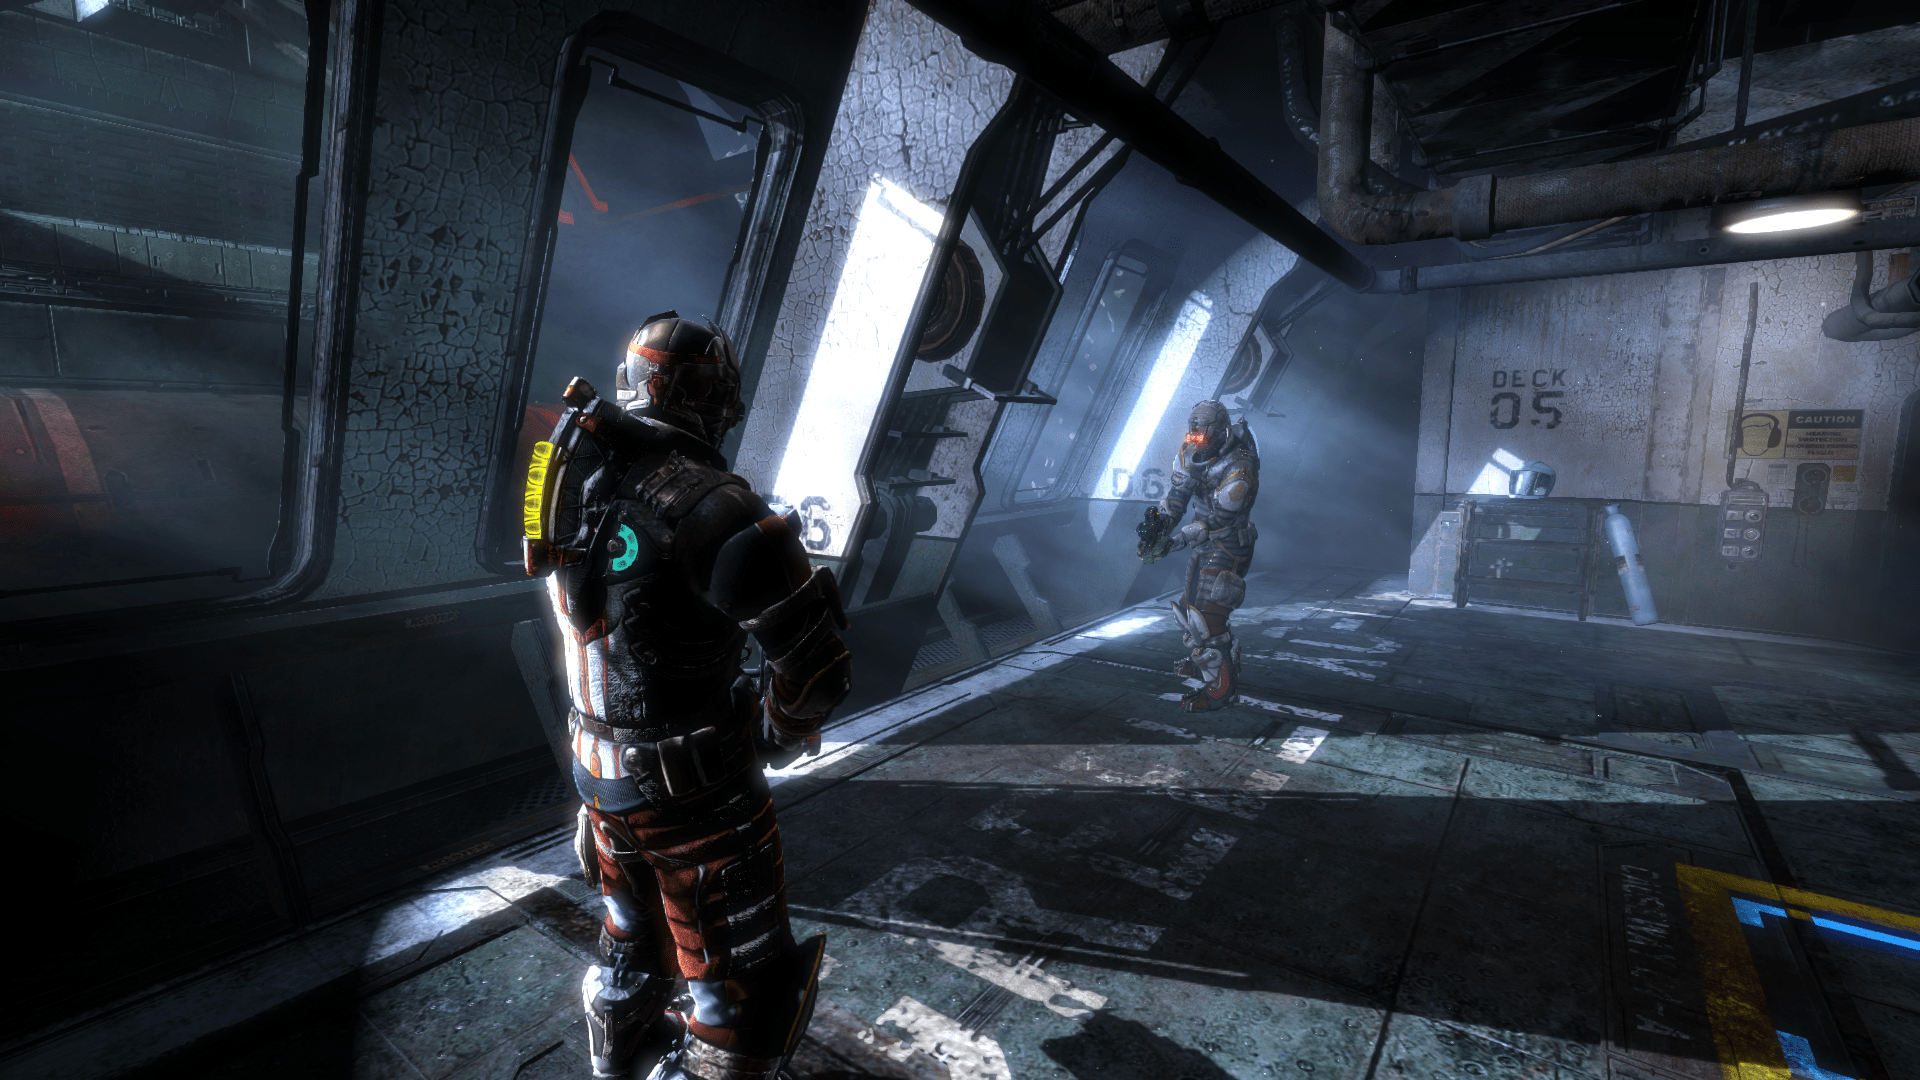 How The Dead Space Saga Lost Its Way